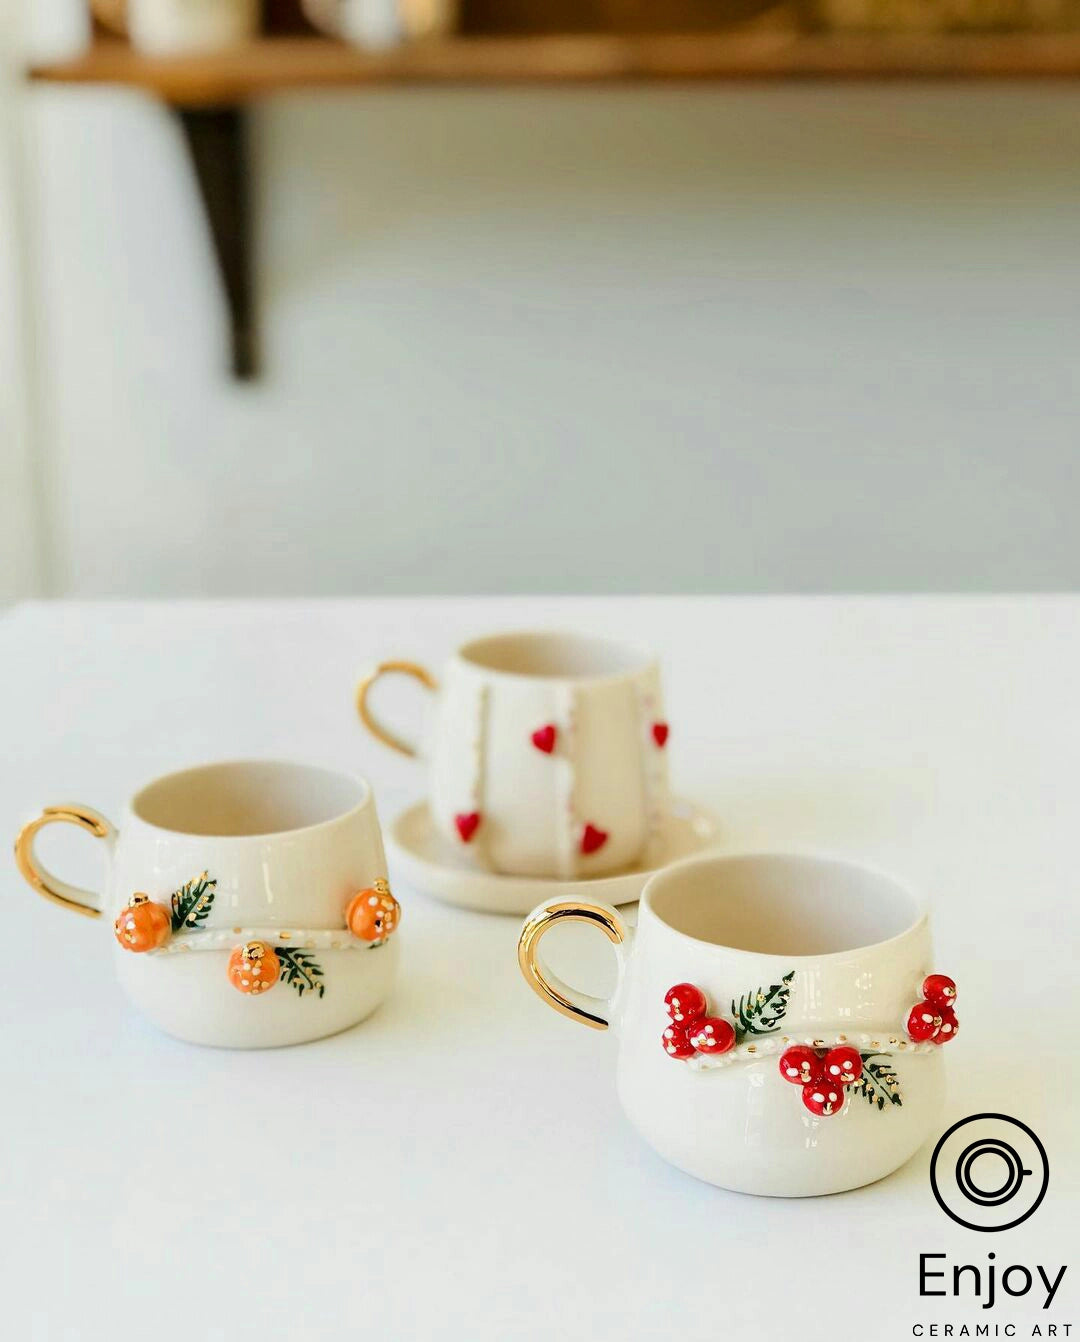 Cheerful Holiday Sip: Handmade Winterberry & Holly Berry Espresso Cups Set with Gold Accents, 5.4 oz